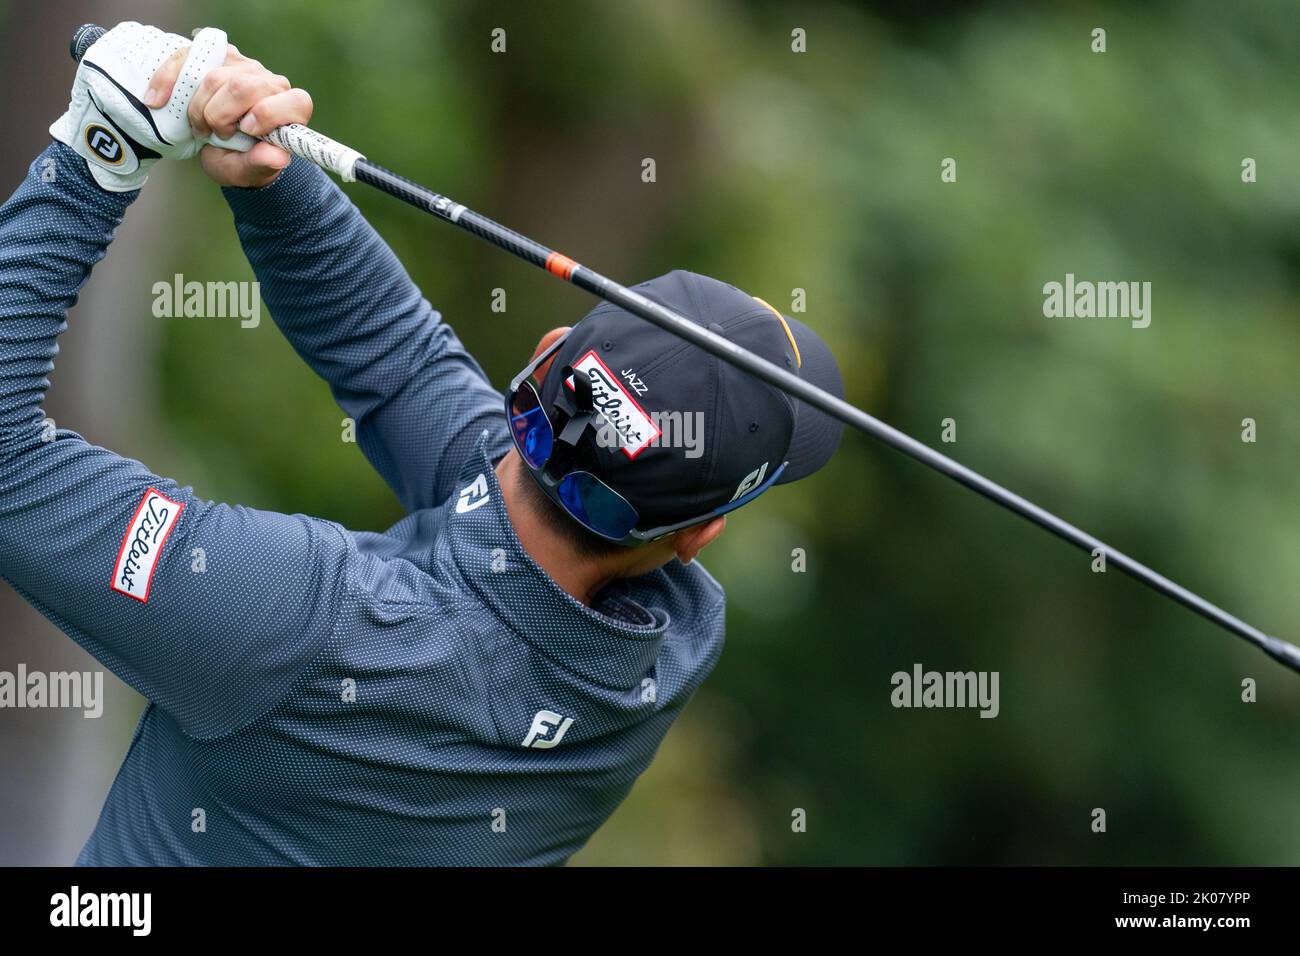 Jazz Janewattananond (THA) and other players wear black ribbon on their hats in memory of the passing of Her Majesty Queen Elizabeth 11 to during the BMW PGA Championship 2022 at Wentworth Club, Virginia Water, United Kingdom, 10th September 2022  (Photo by Richard Washbrooke/News Images) Stock Photo